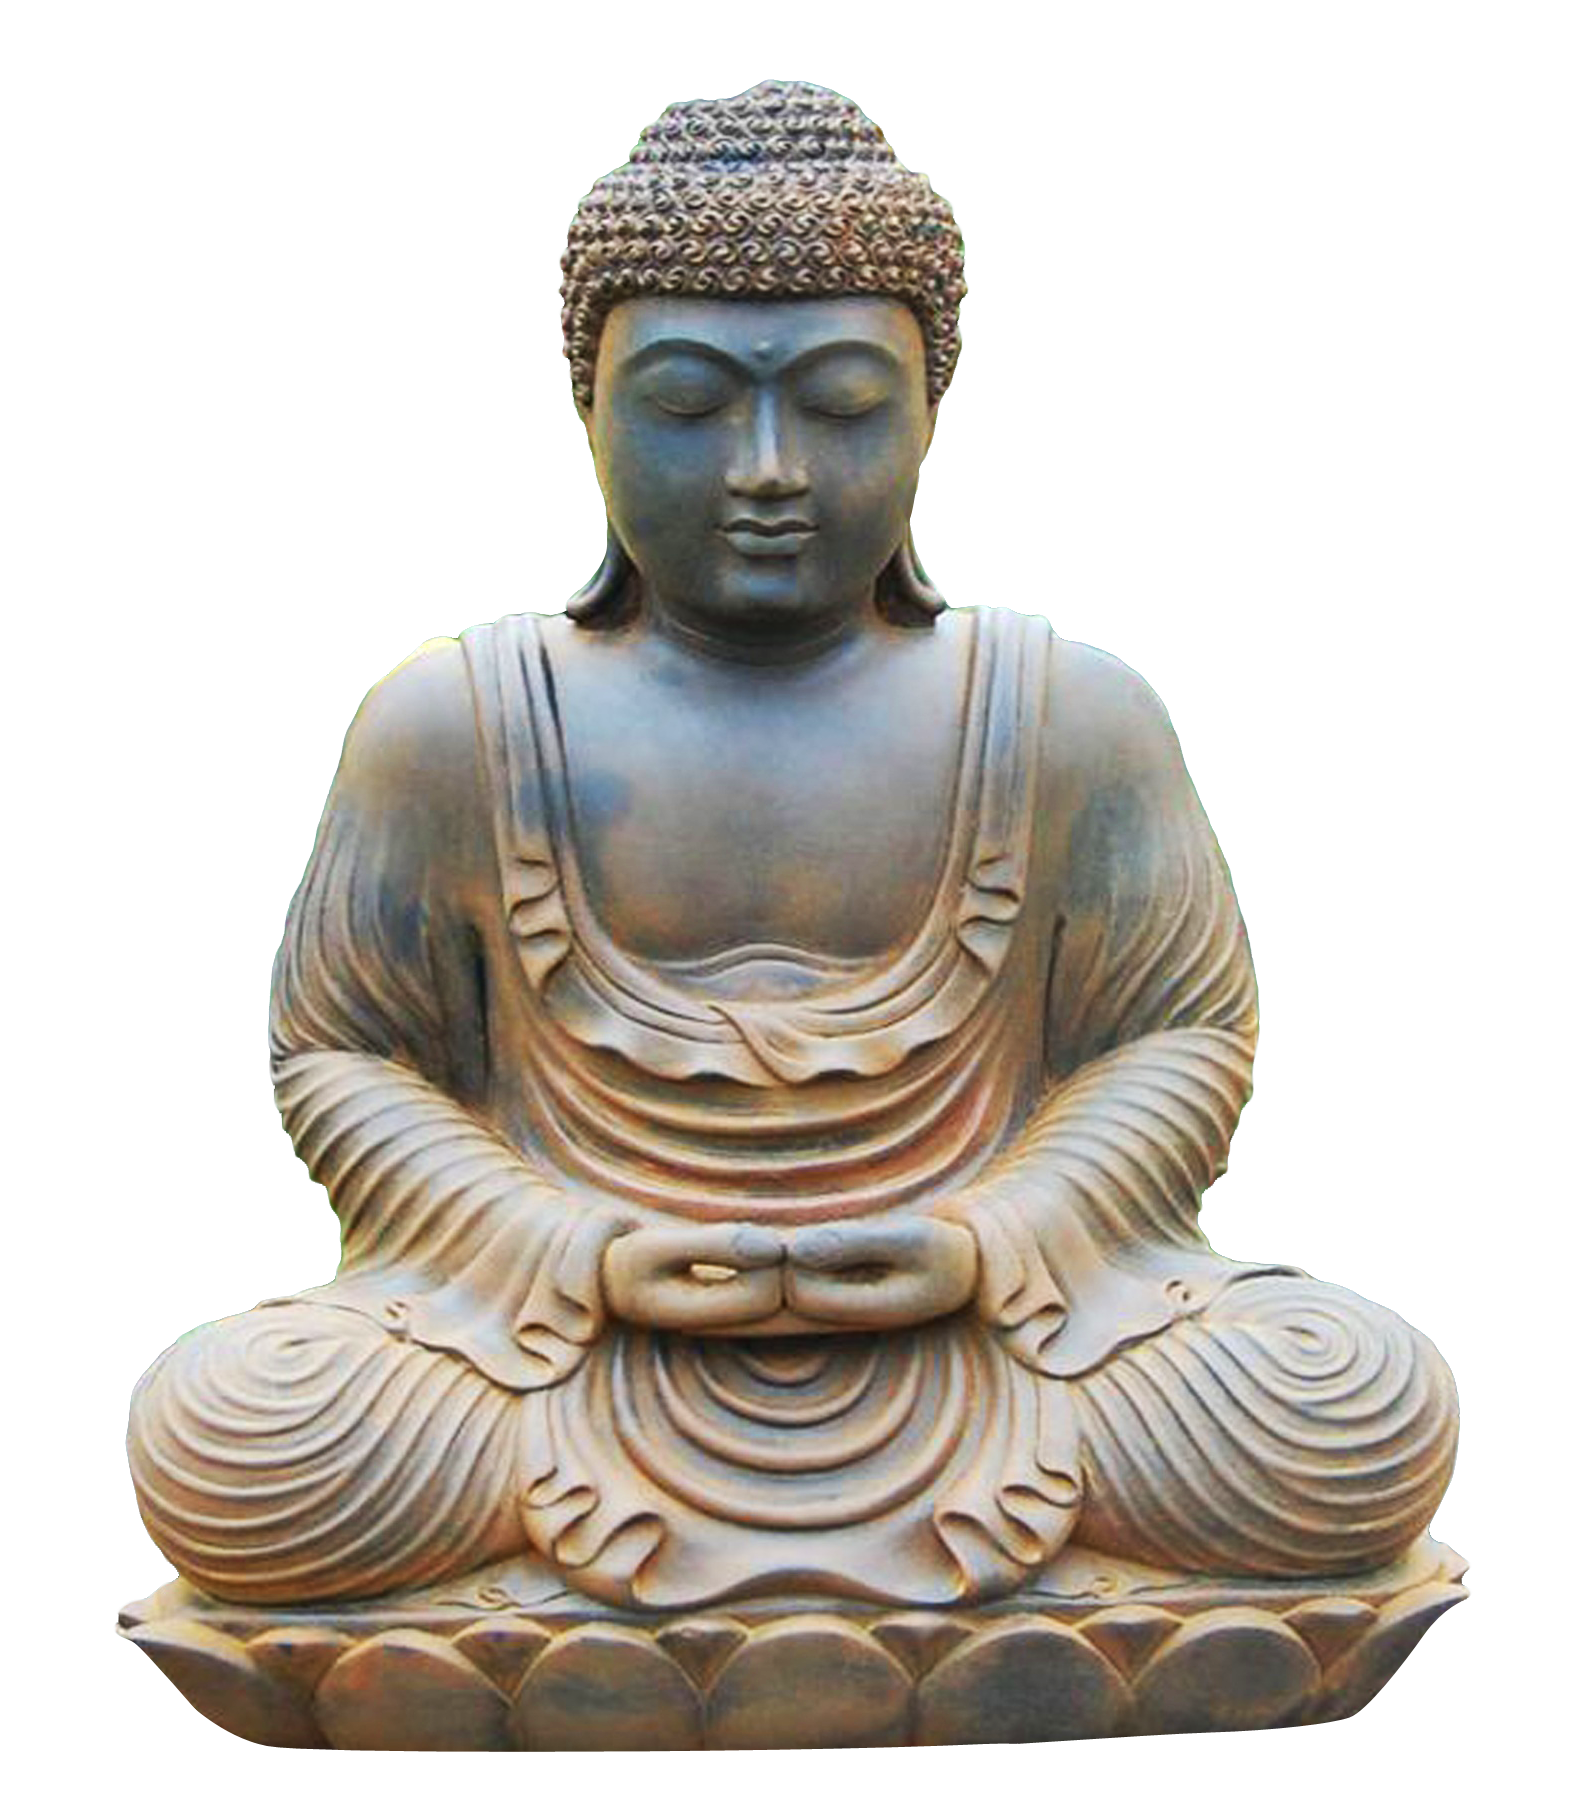 A Statue Of A Person Sitting In A Lotus Position